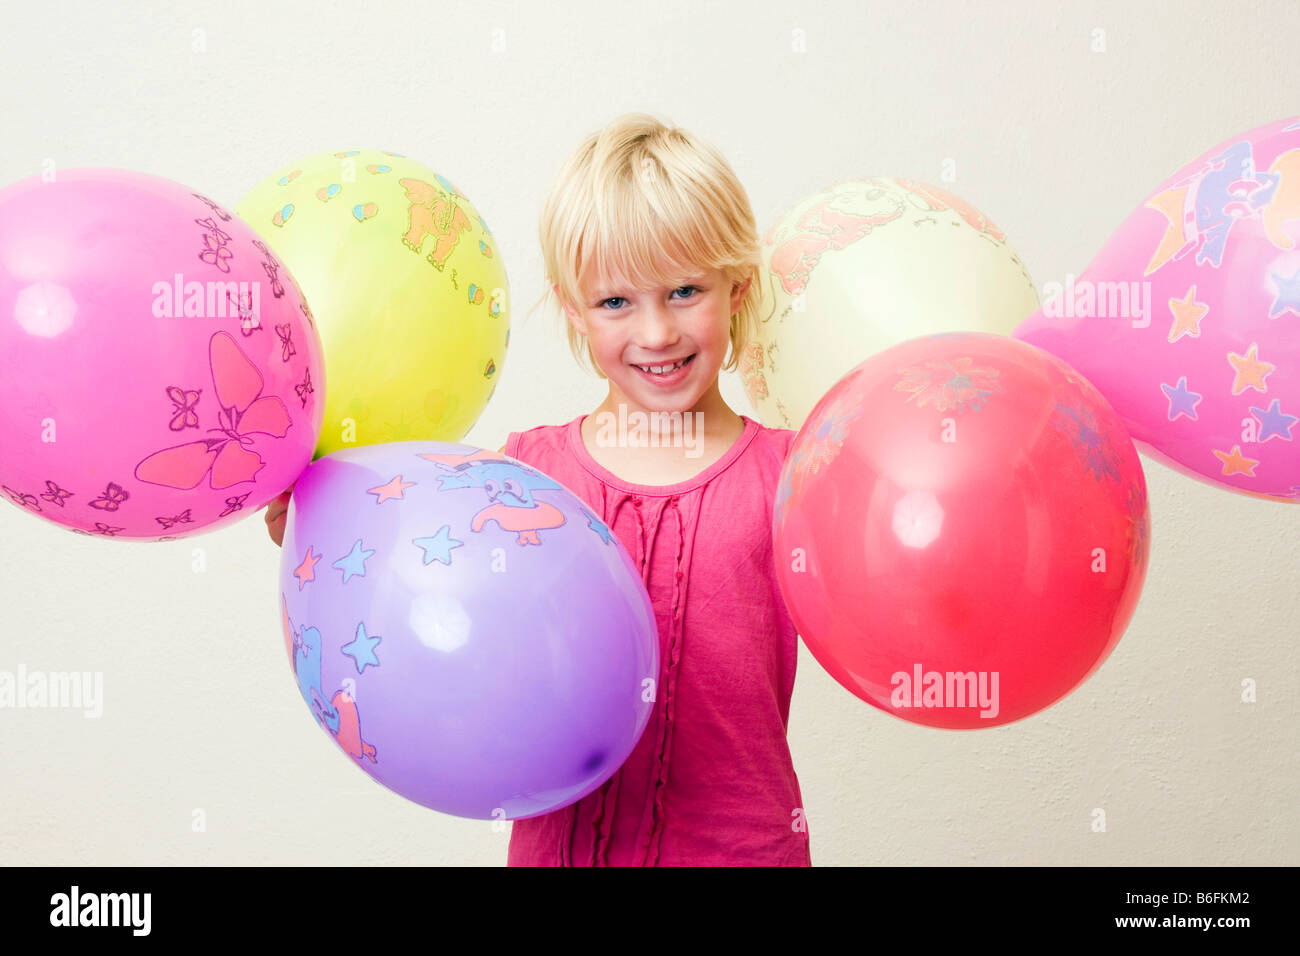 Girl, 7 years, with balloons Stock Photo